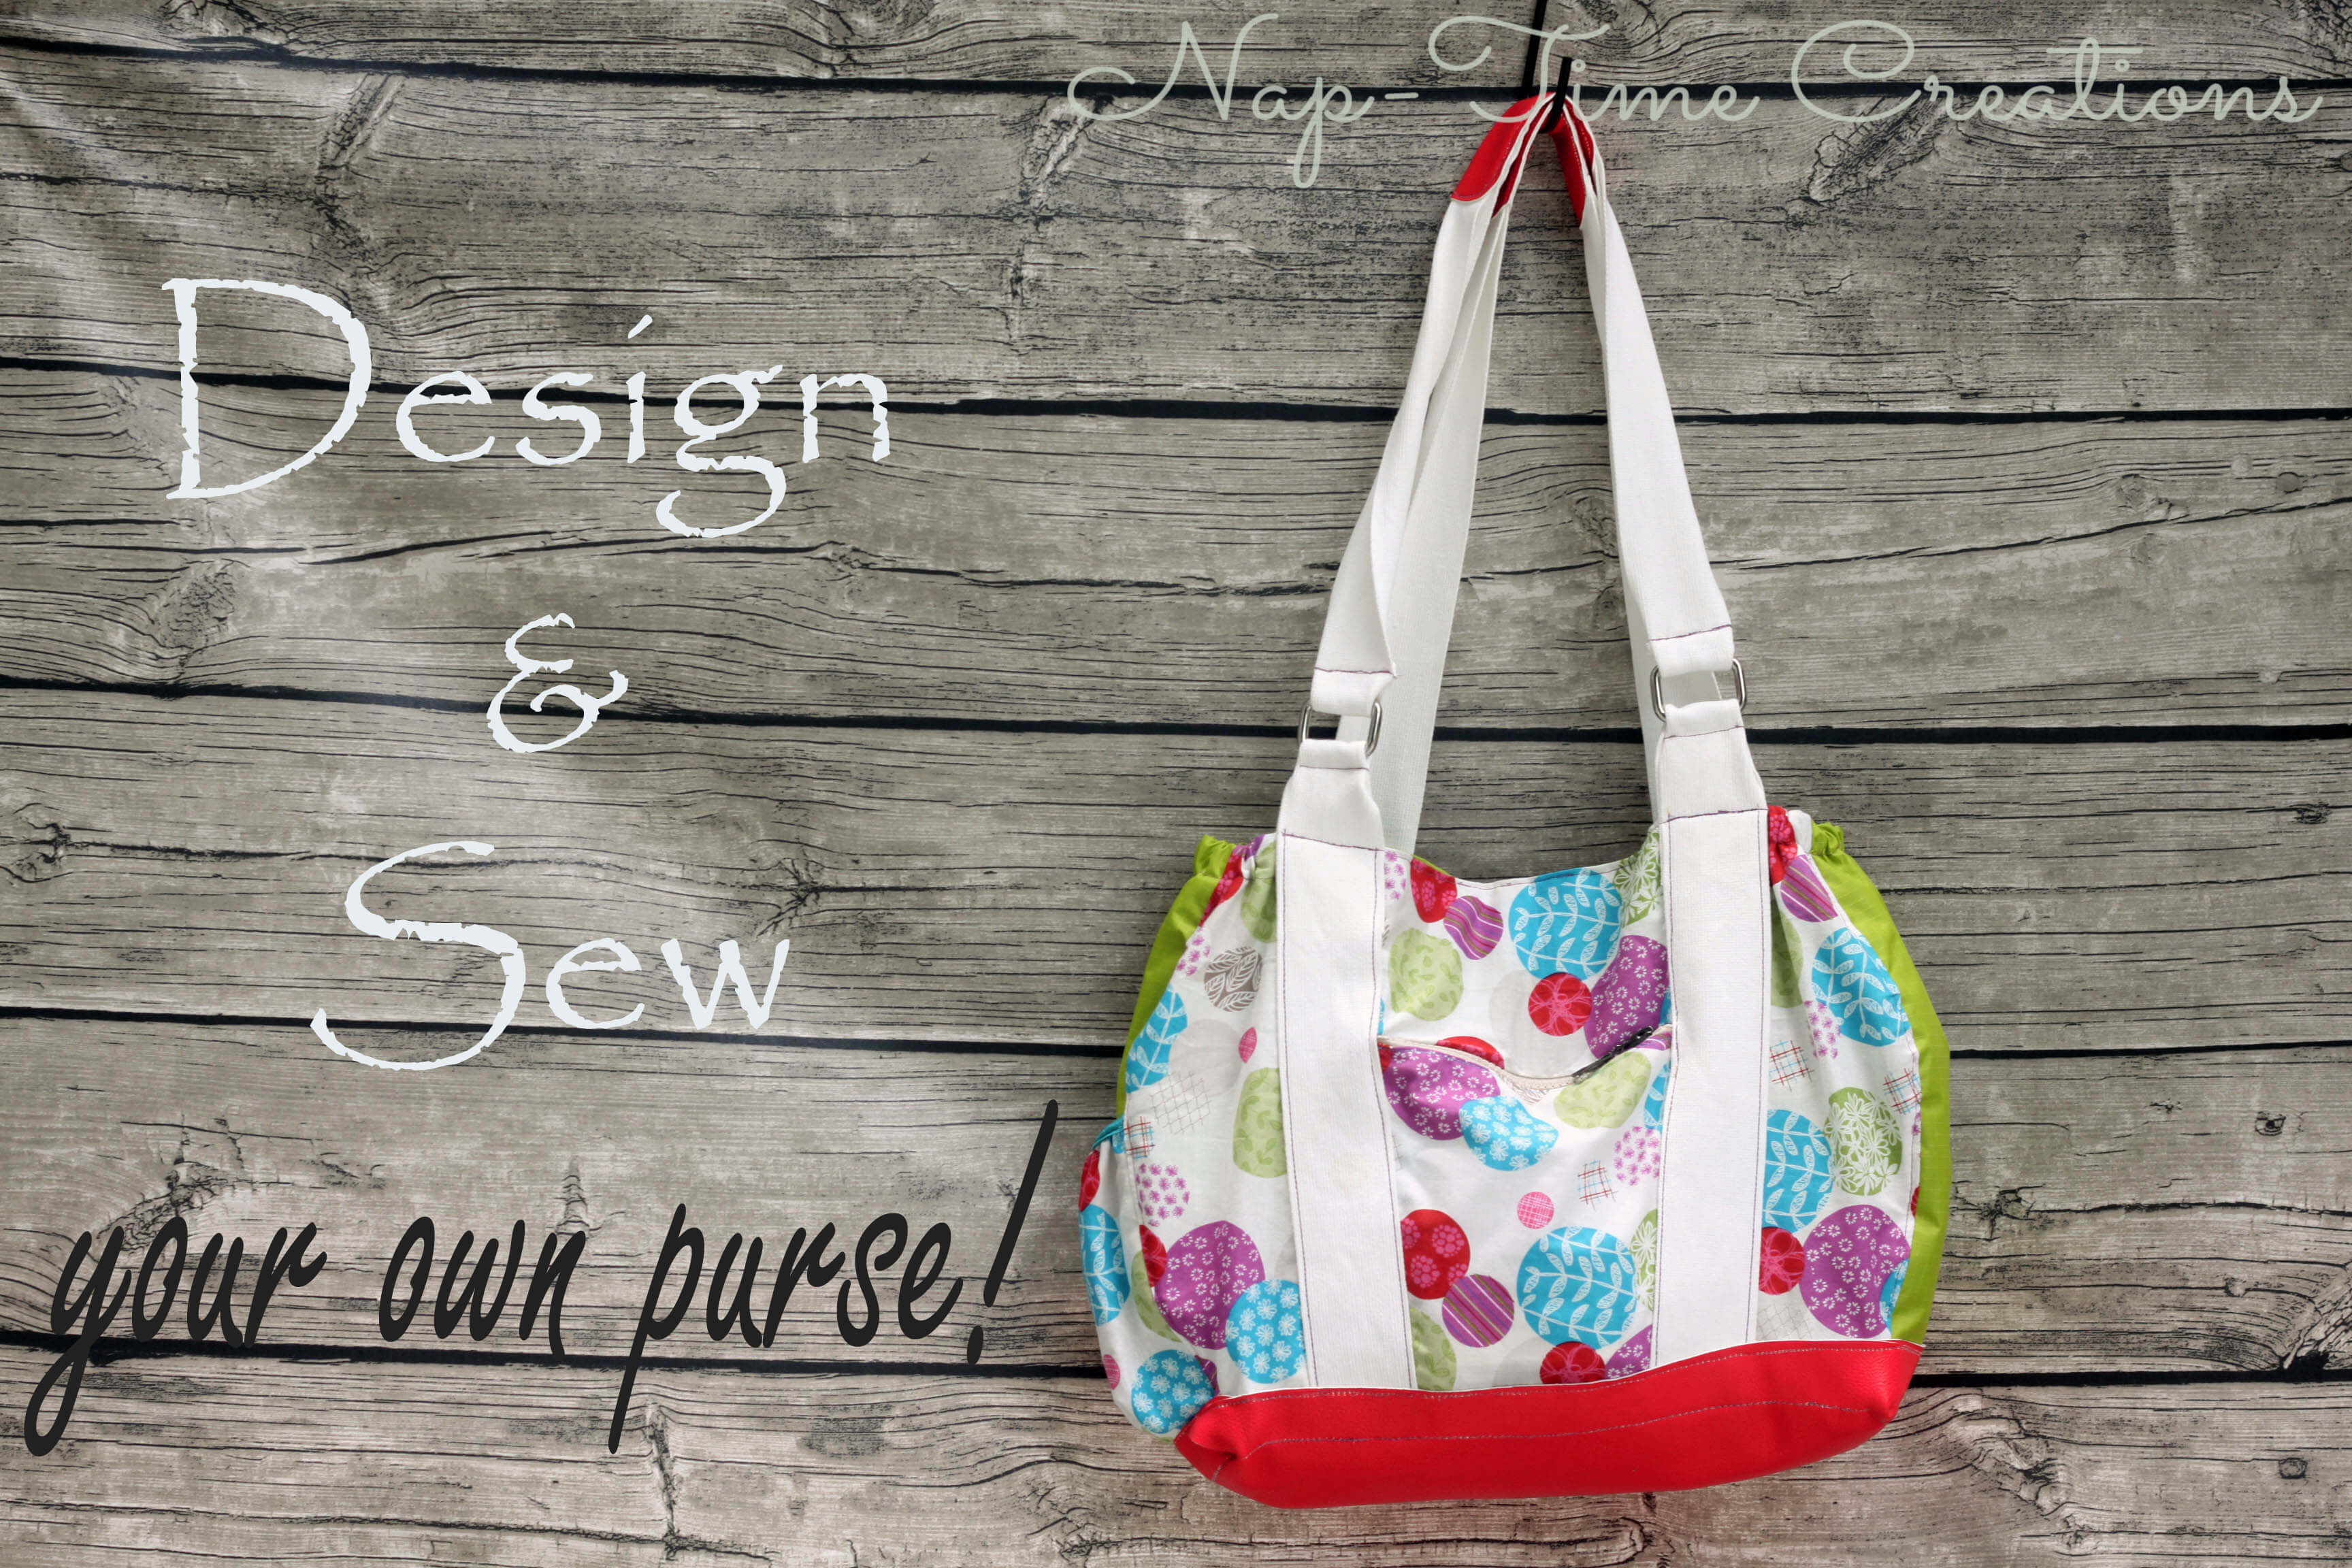 How to use PDF sewing patterns - Everything you need to know! - Life Sew  Savory